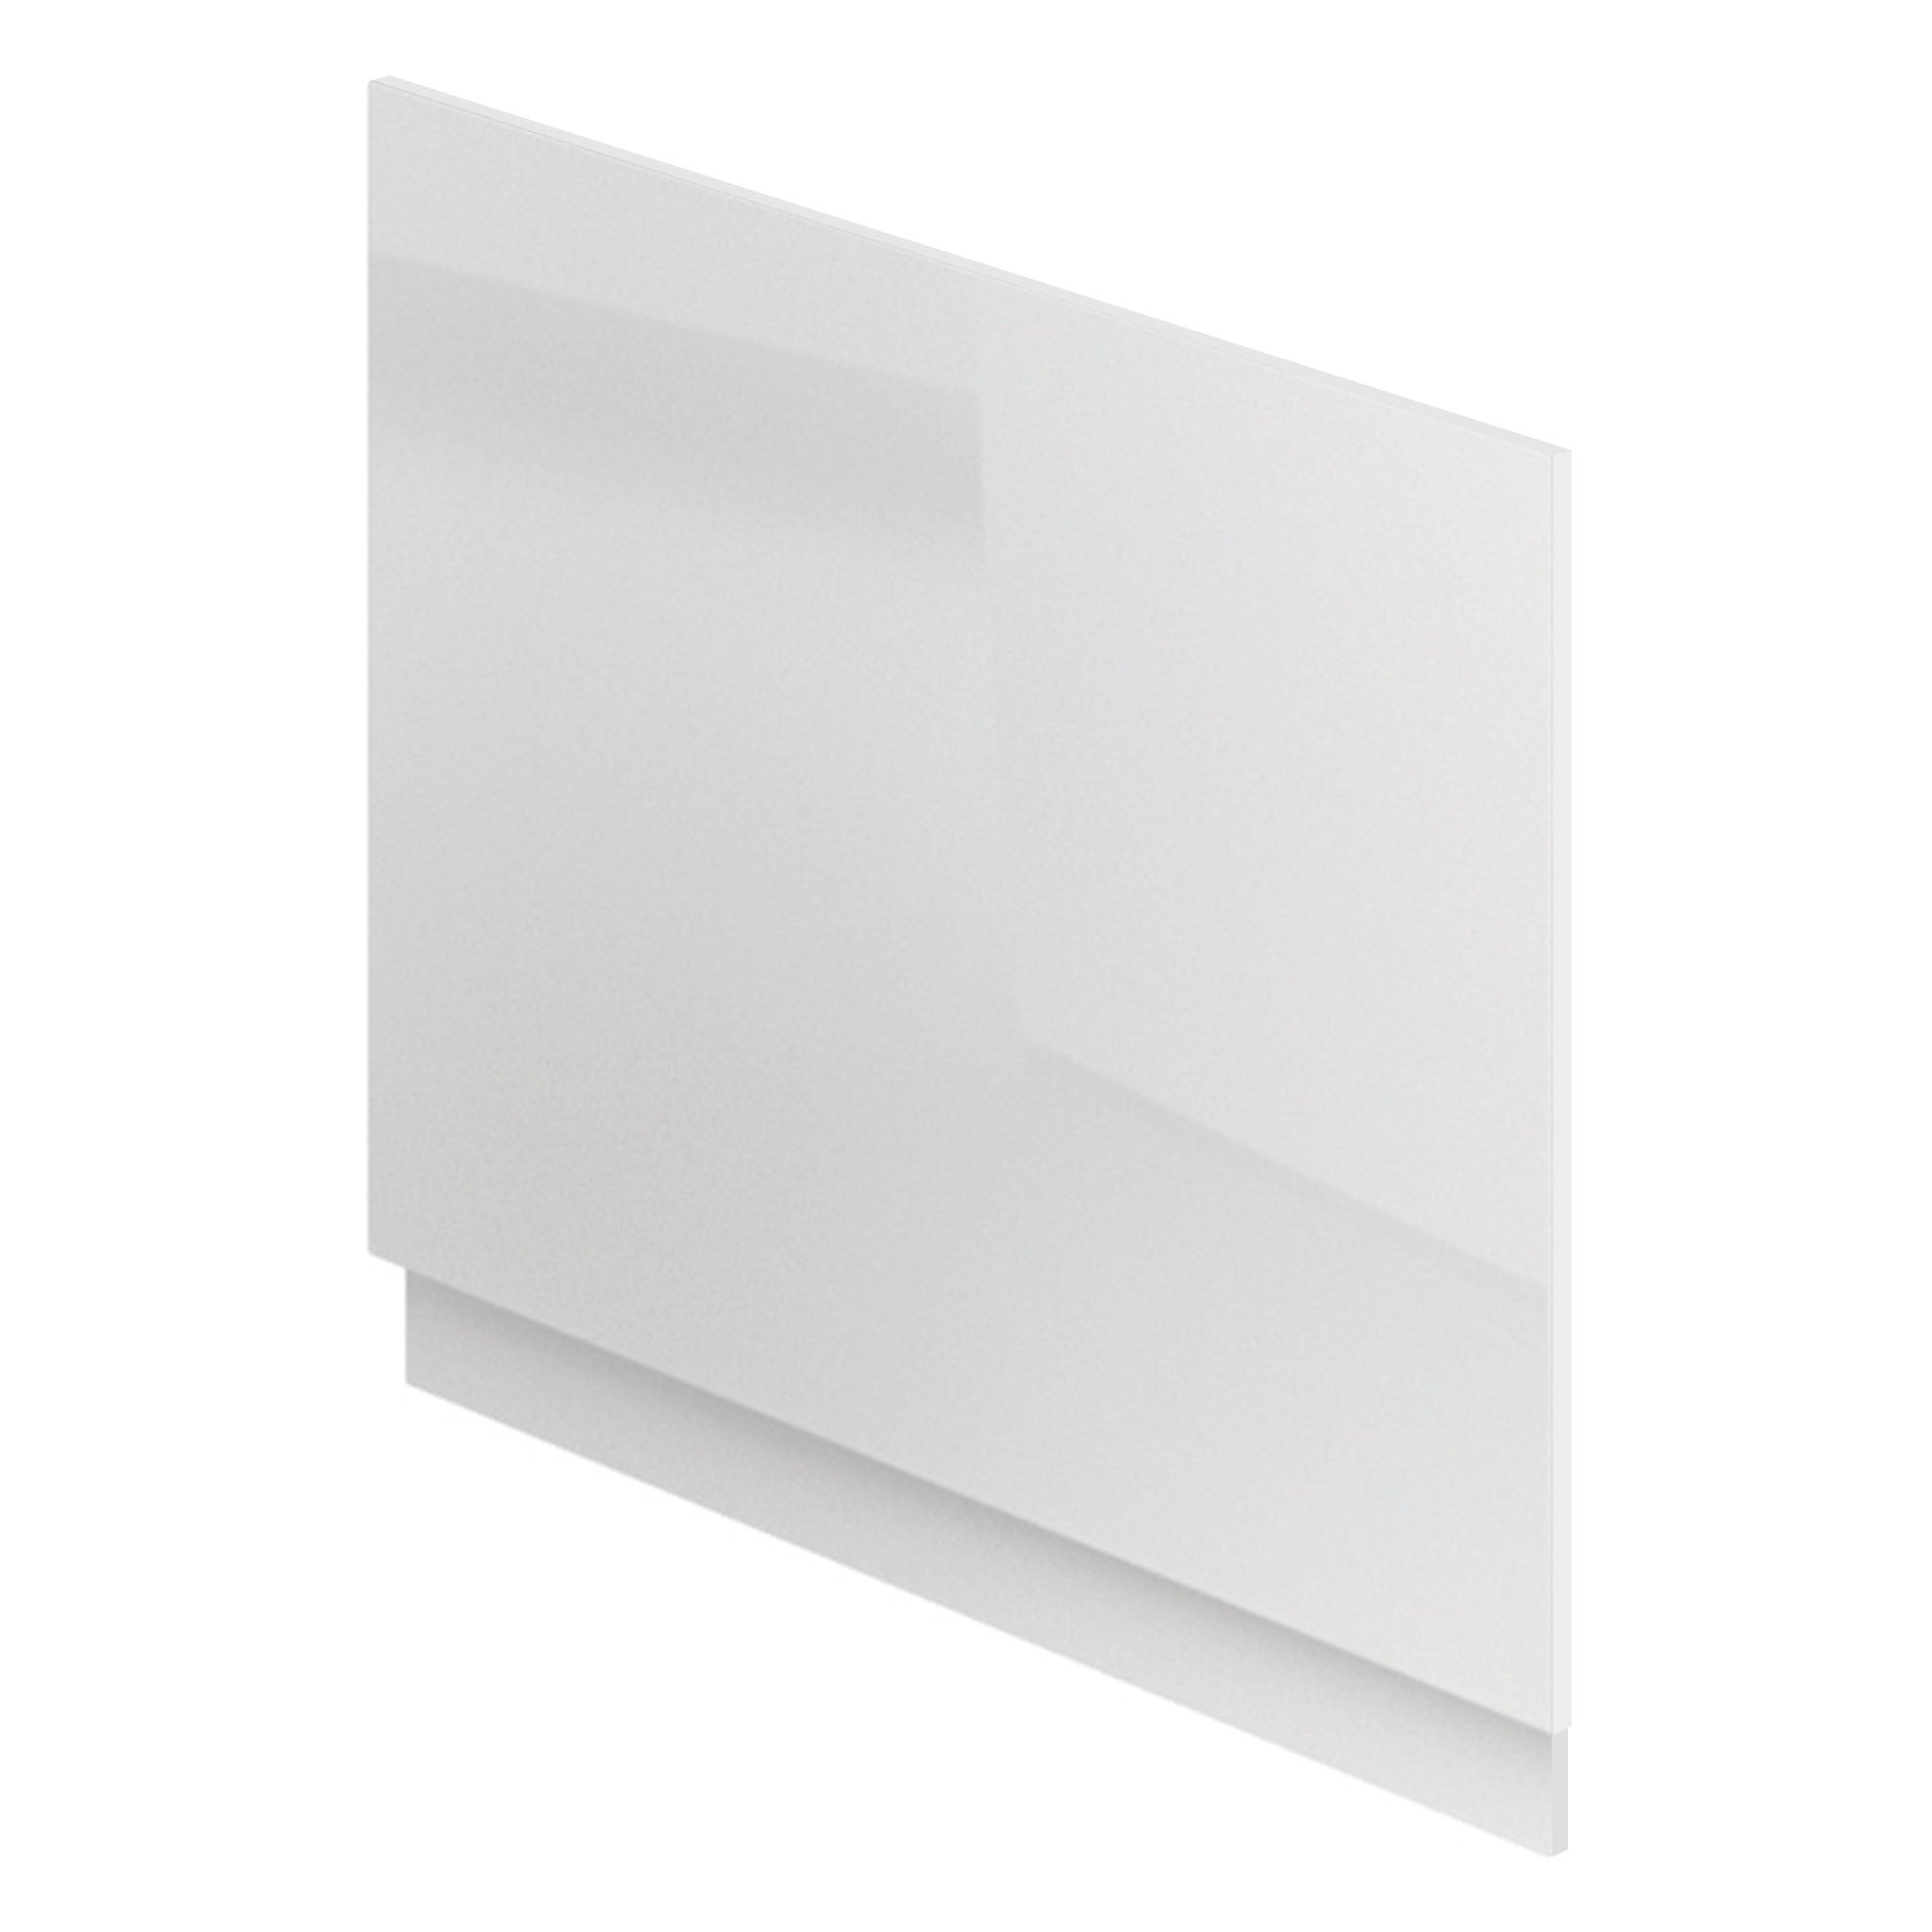 MyStyle 2 Piece Adjustable End Panel - White Gloss